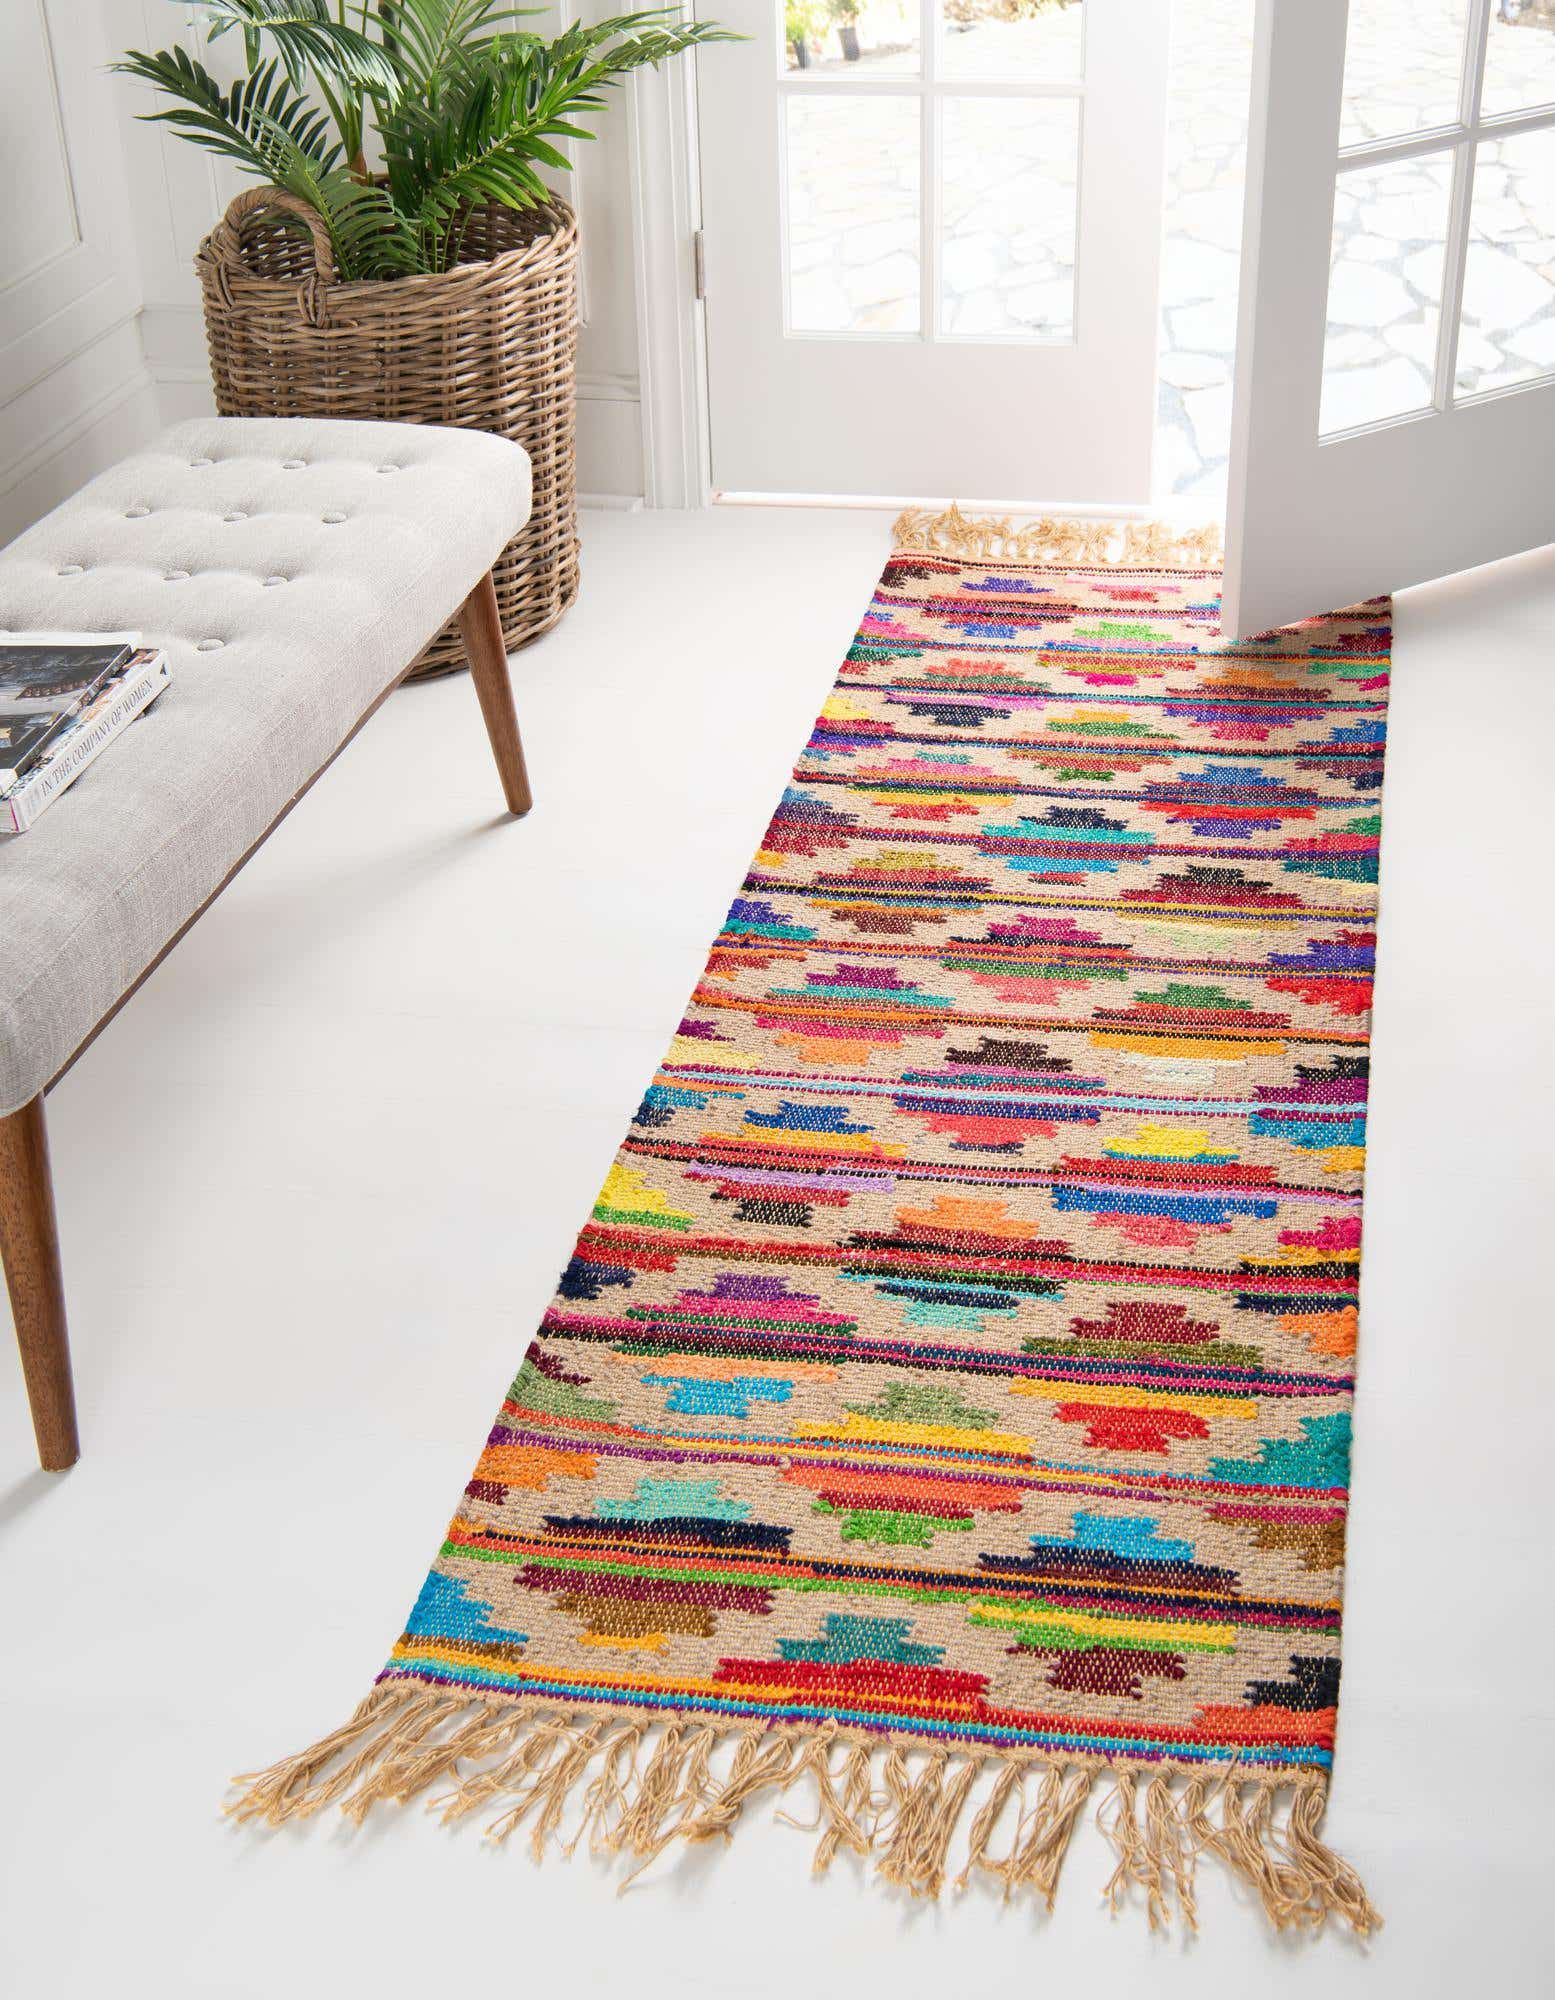 Why dhurrie rugs are popular among homeowners